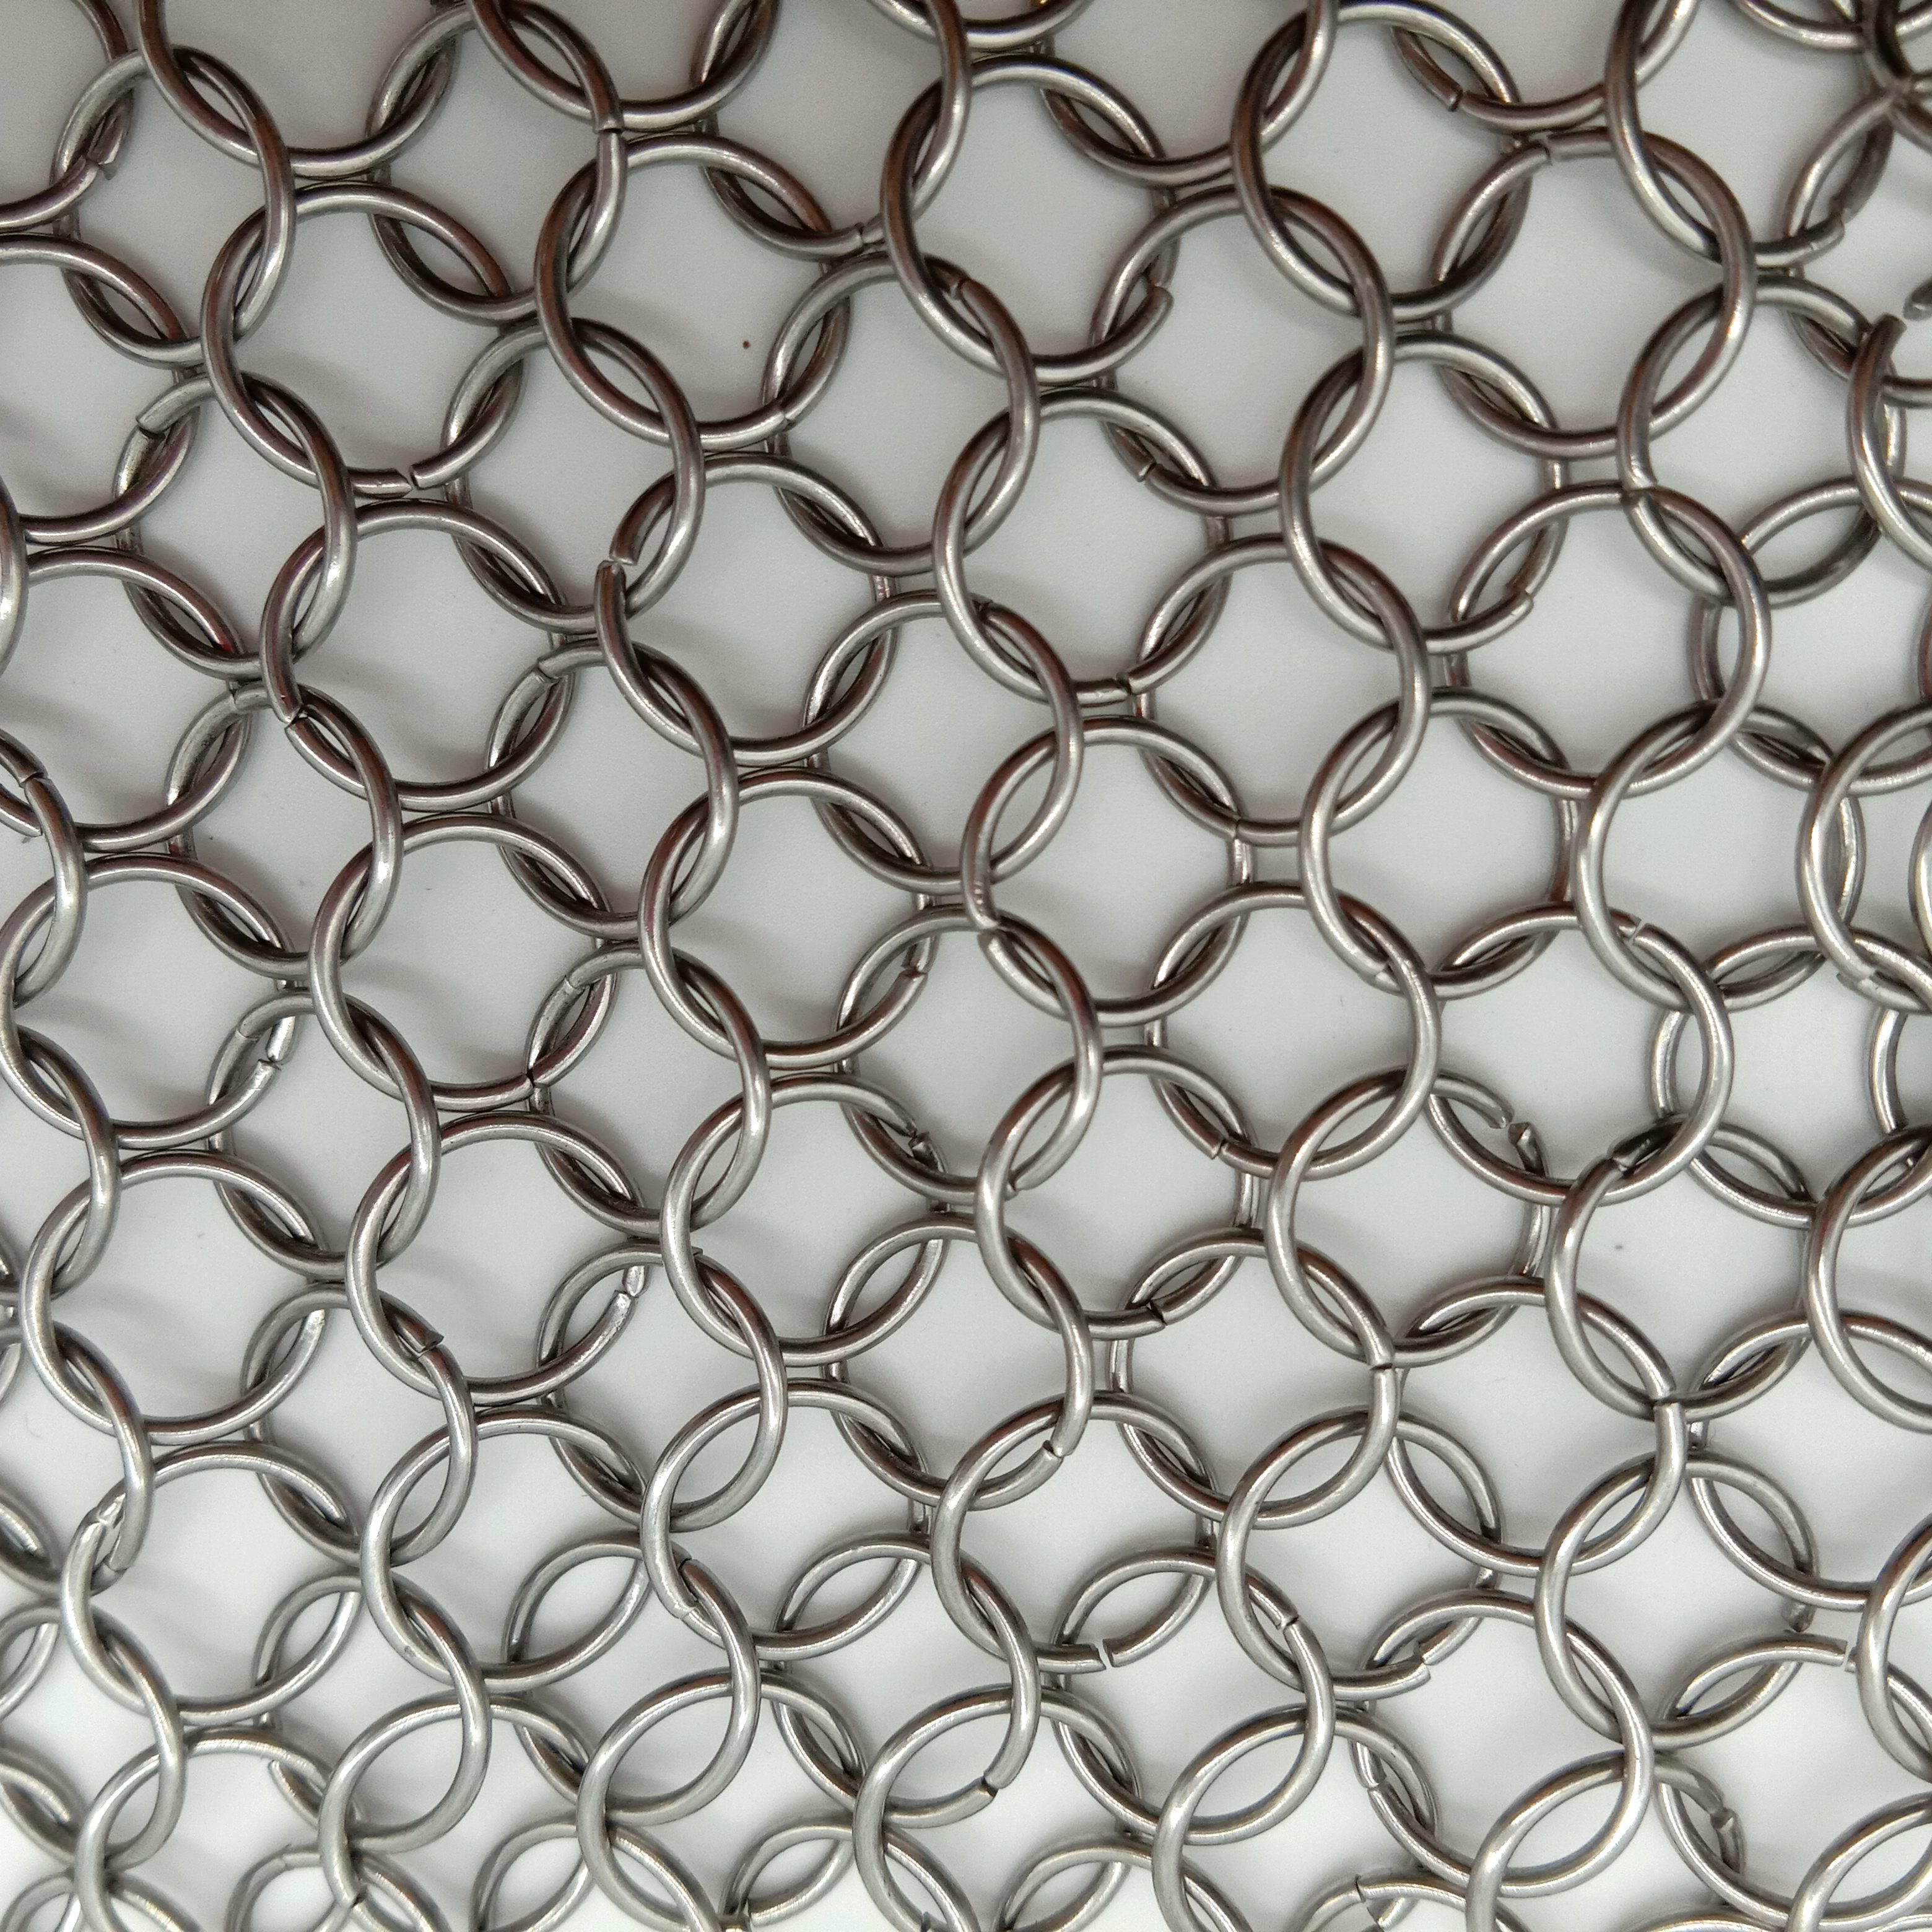 China wholesale Chain Link Curtain - Stainless steel chain link ring mesh curtain fence – Dongjie